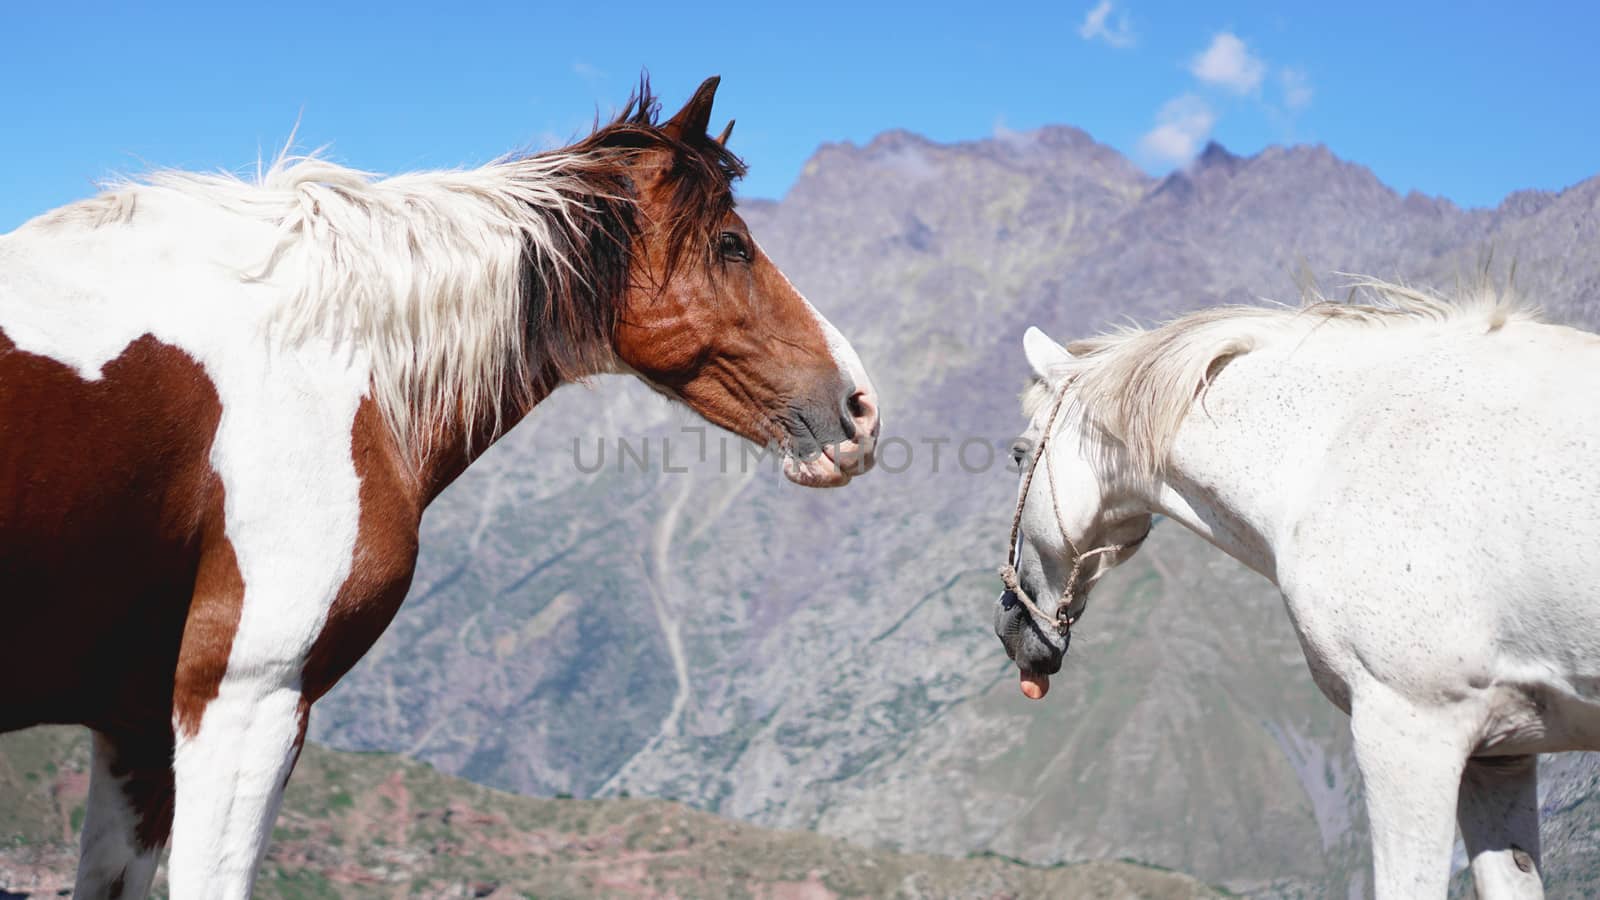 Wild horses pasturing on mountain environment. Beautiful nature background by natali_brill